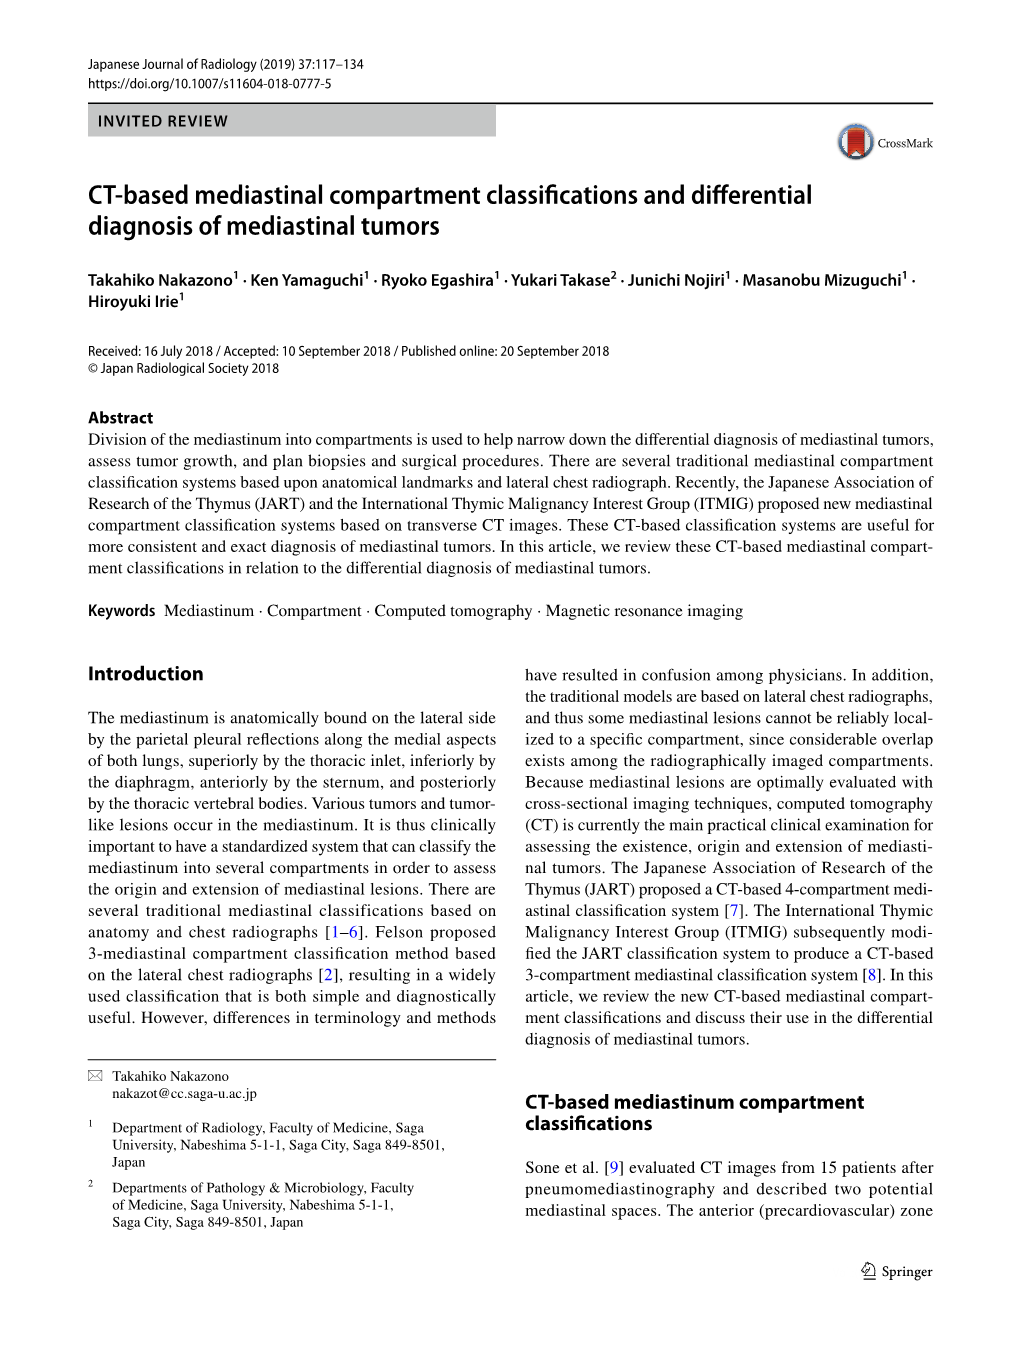 CT-Based Mediastinal Compartment Classifications and Differential